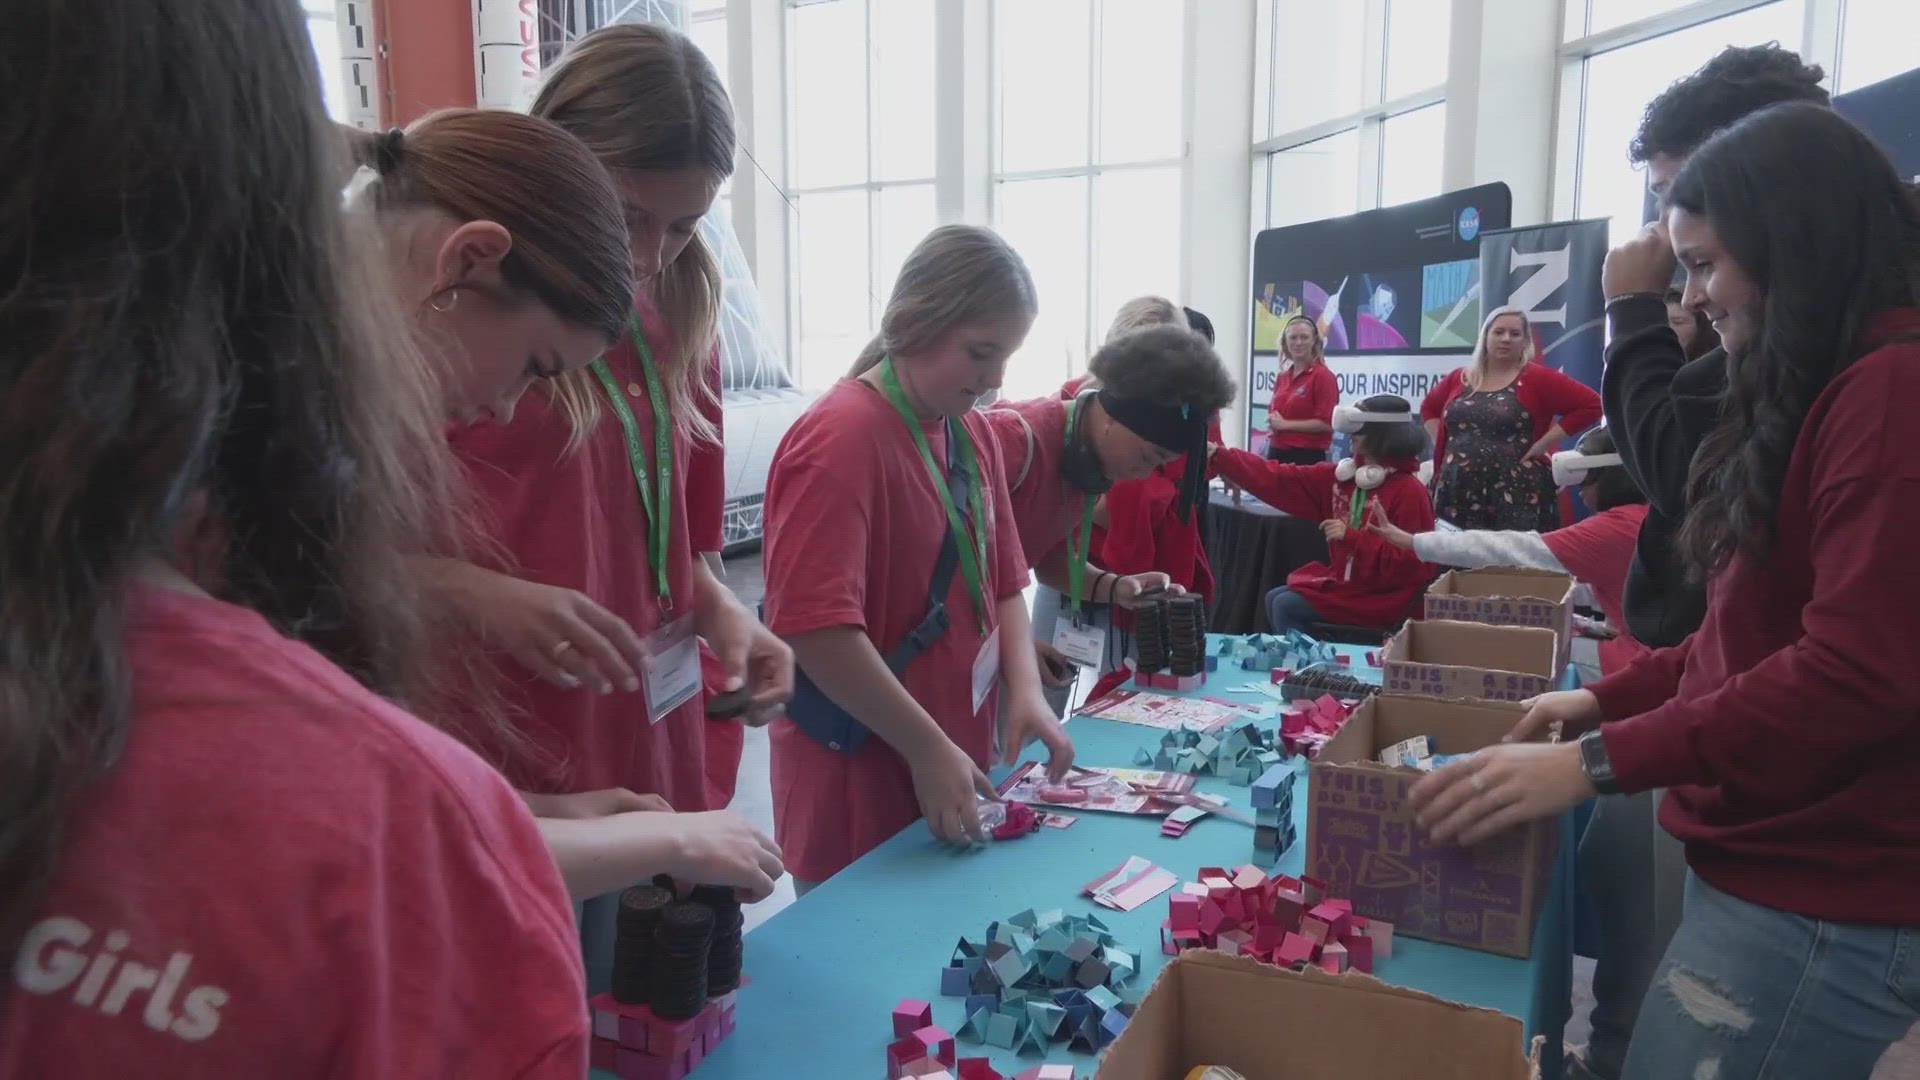 3News' Danielle Wiggins reports from the event held at the Great Lakes Science Center.